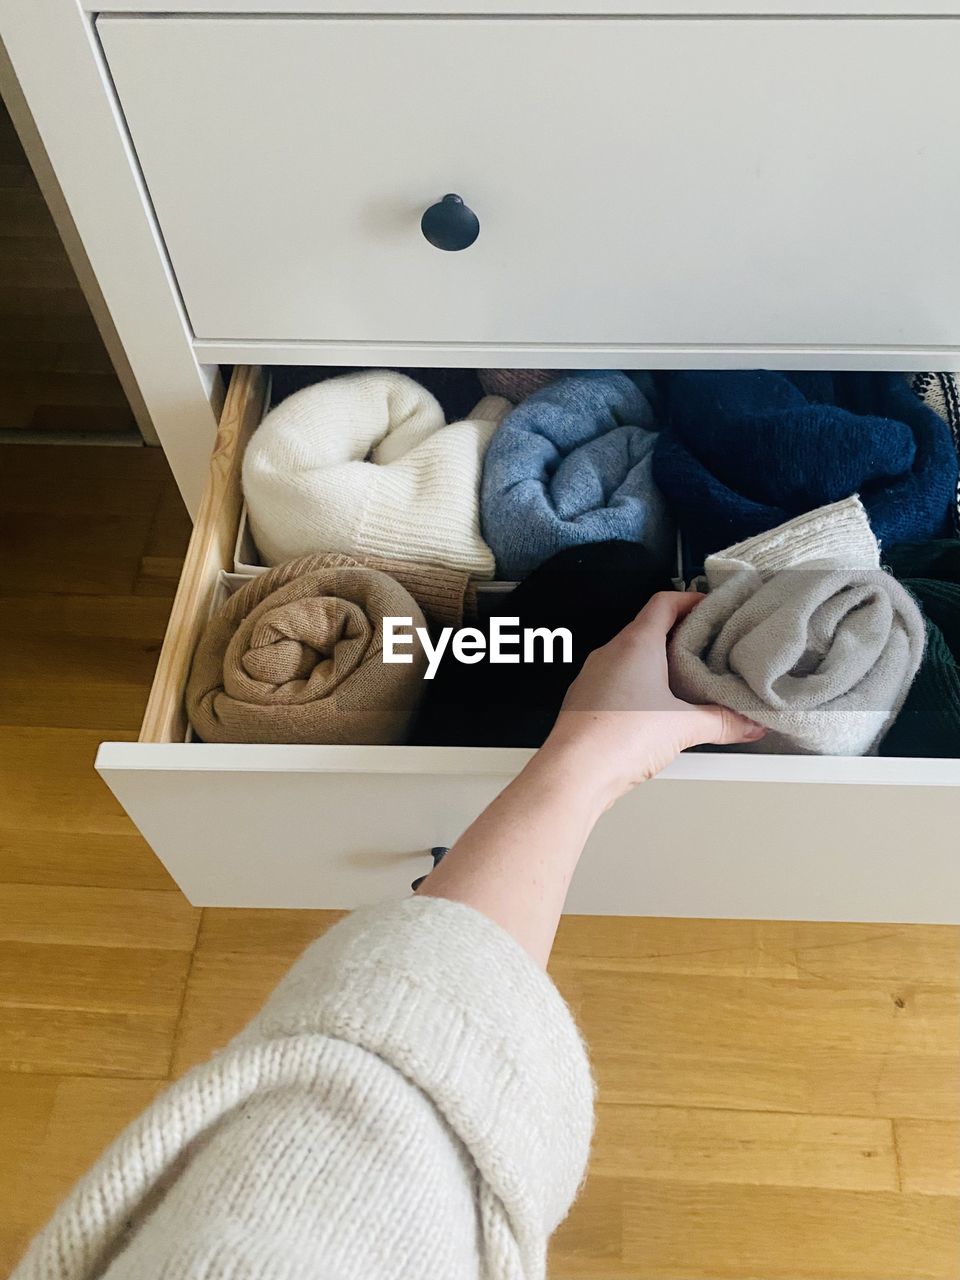 Organized dresser drawer and a human hand reaching for a sweater 